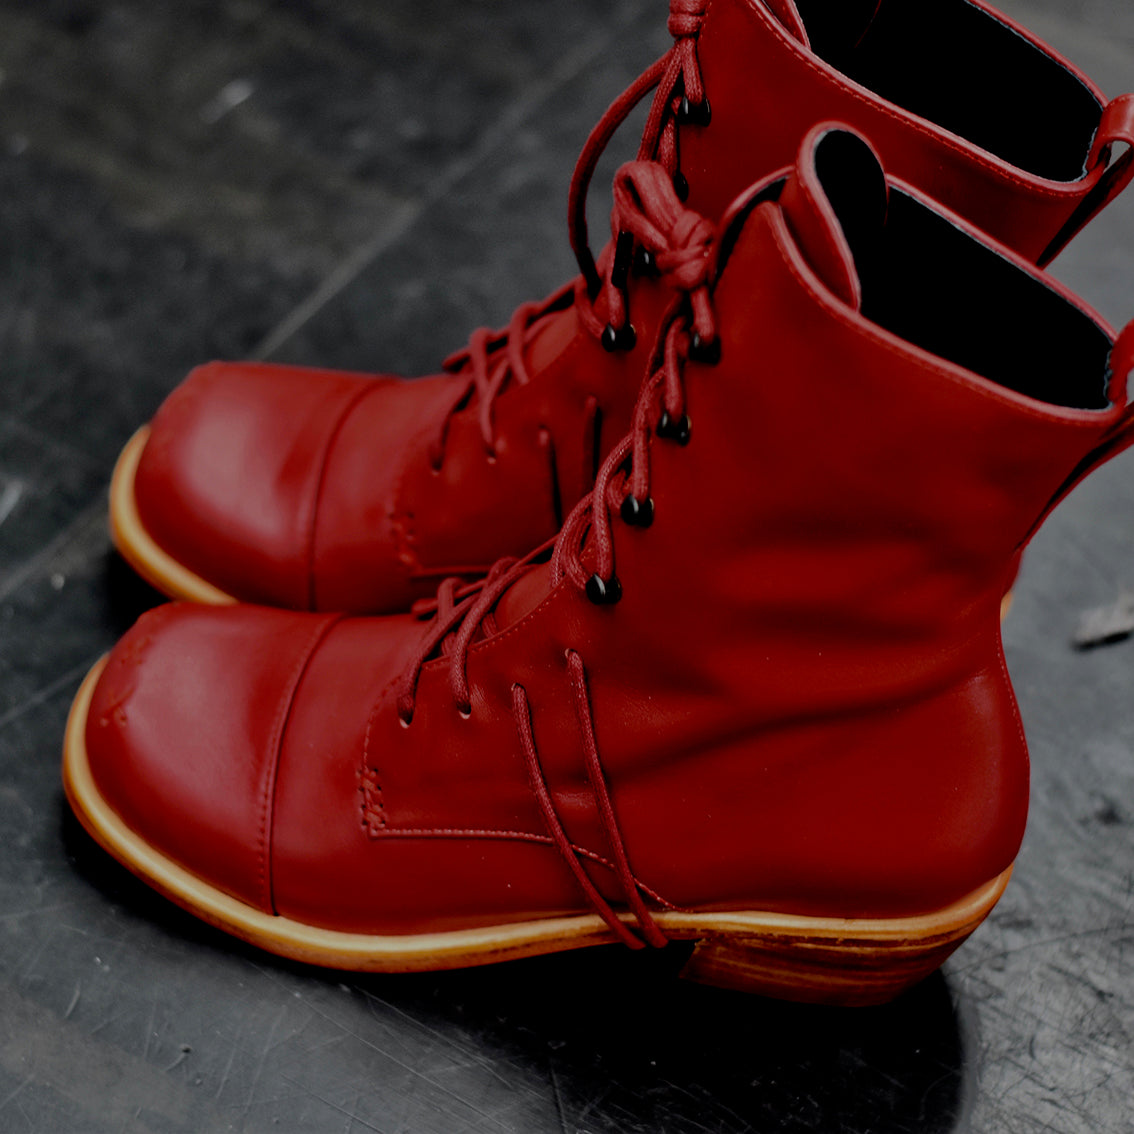 The Banner Boot - Gorgeous deep red